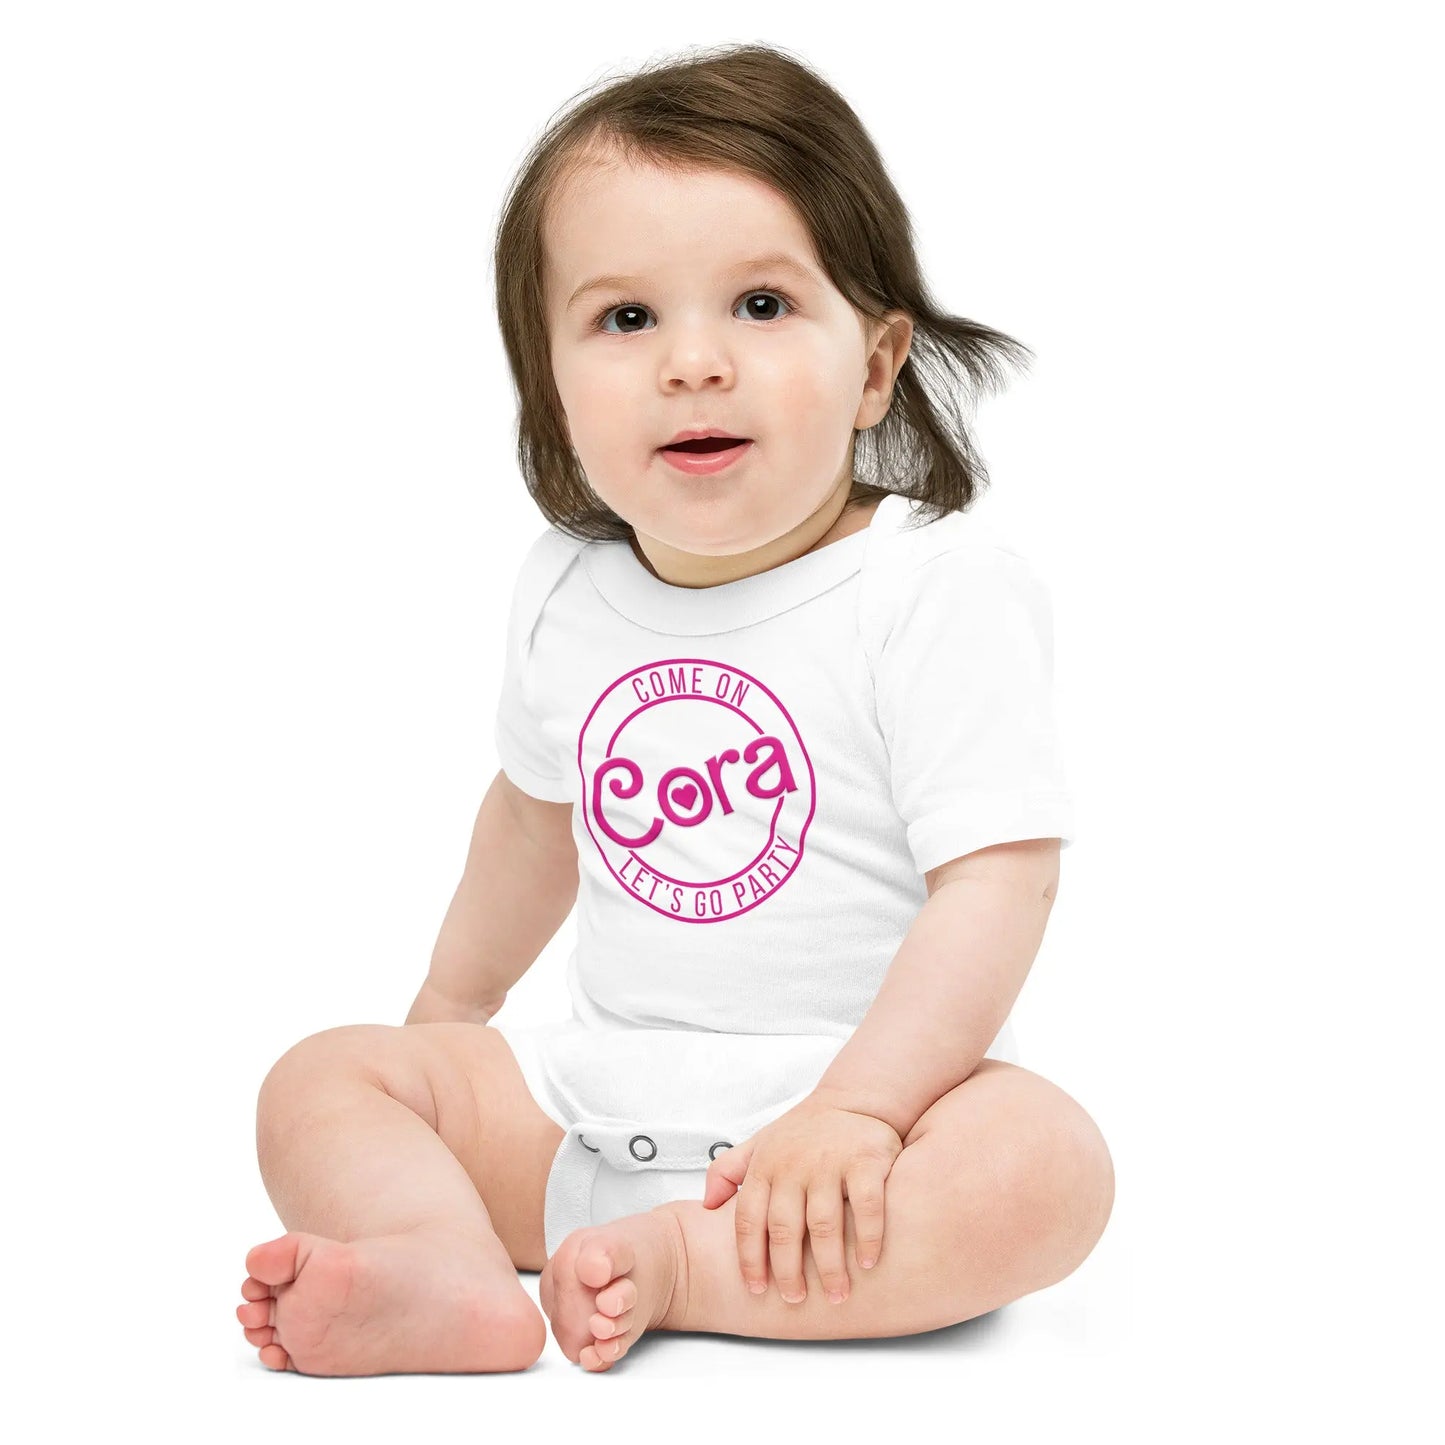 Personalized Let's Go Party Baby Onesie Amazing Faith Designs